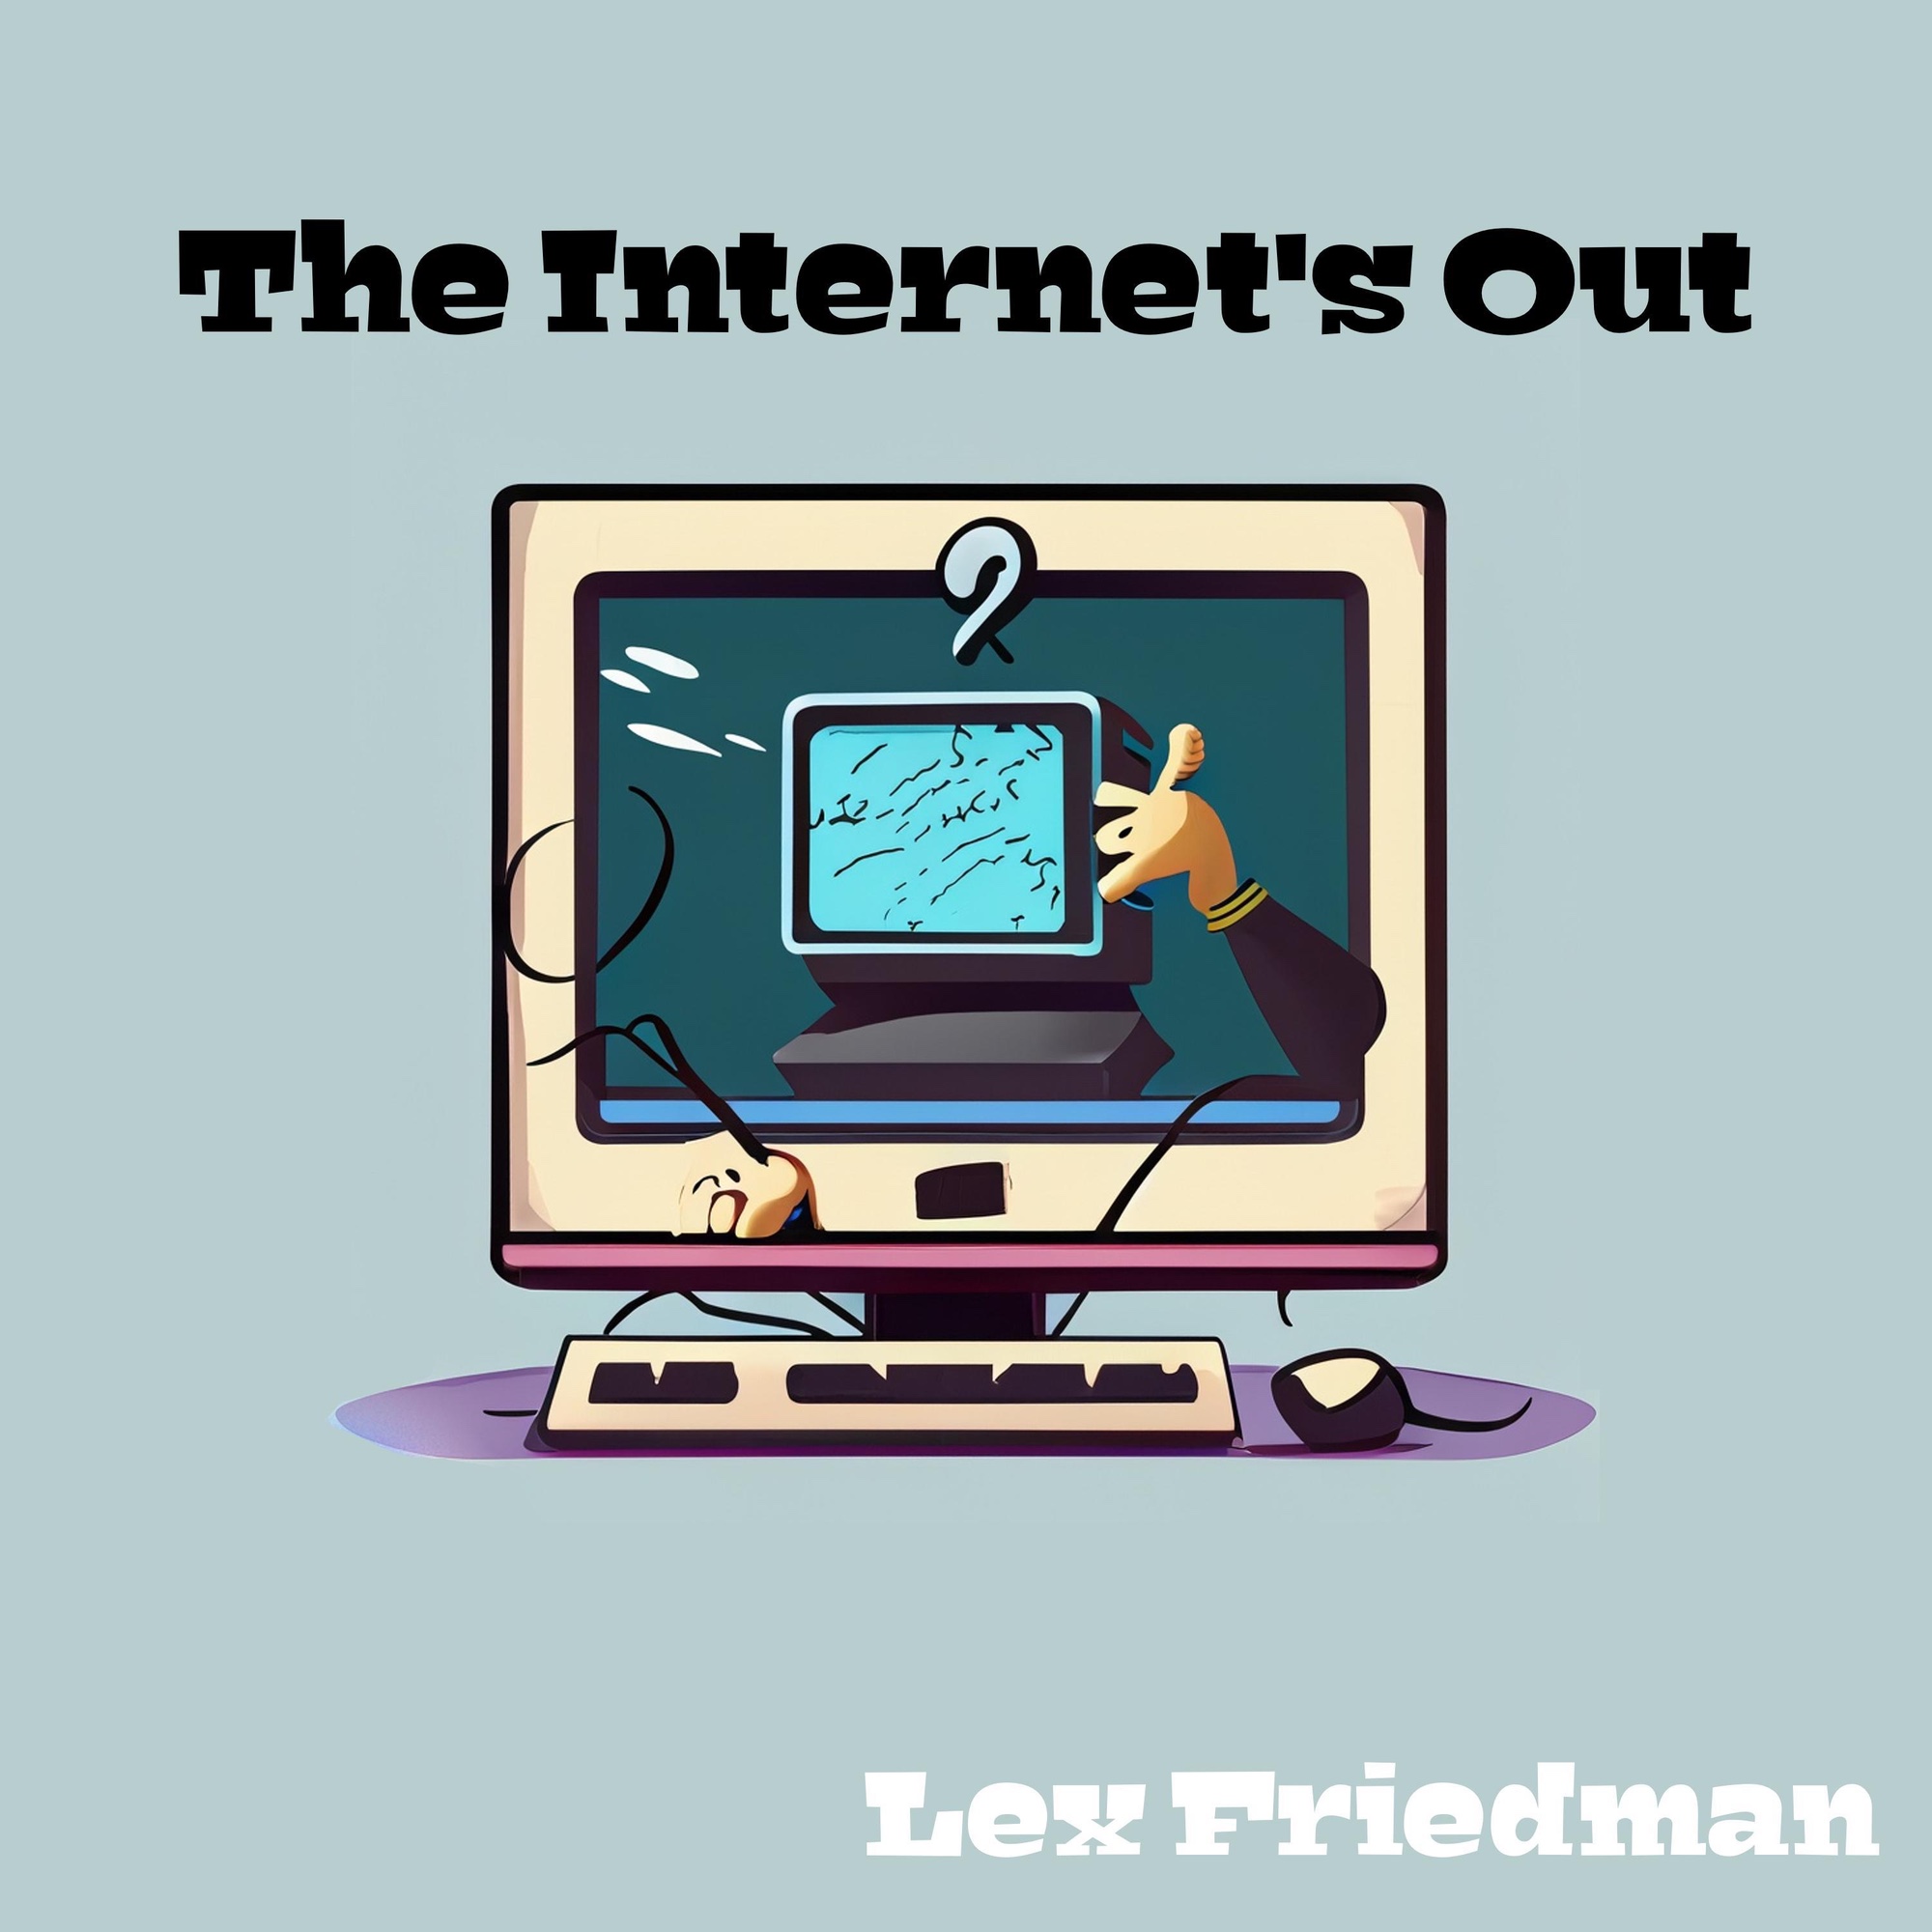 The Internet's Out album cover: Blue background with a weird, confused computer drawing